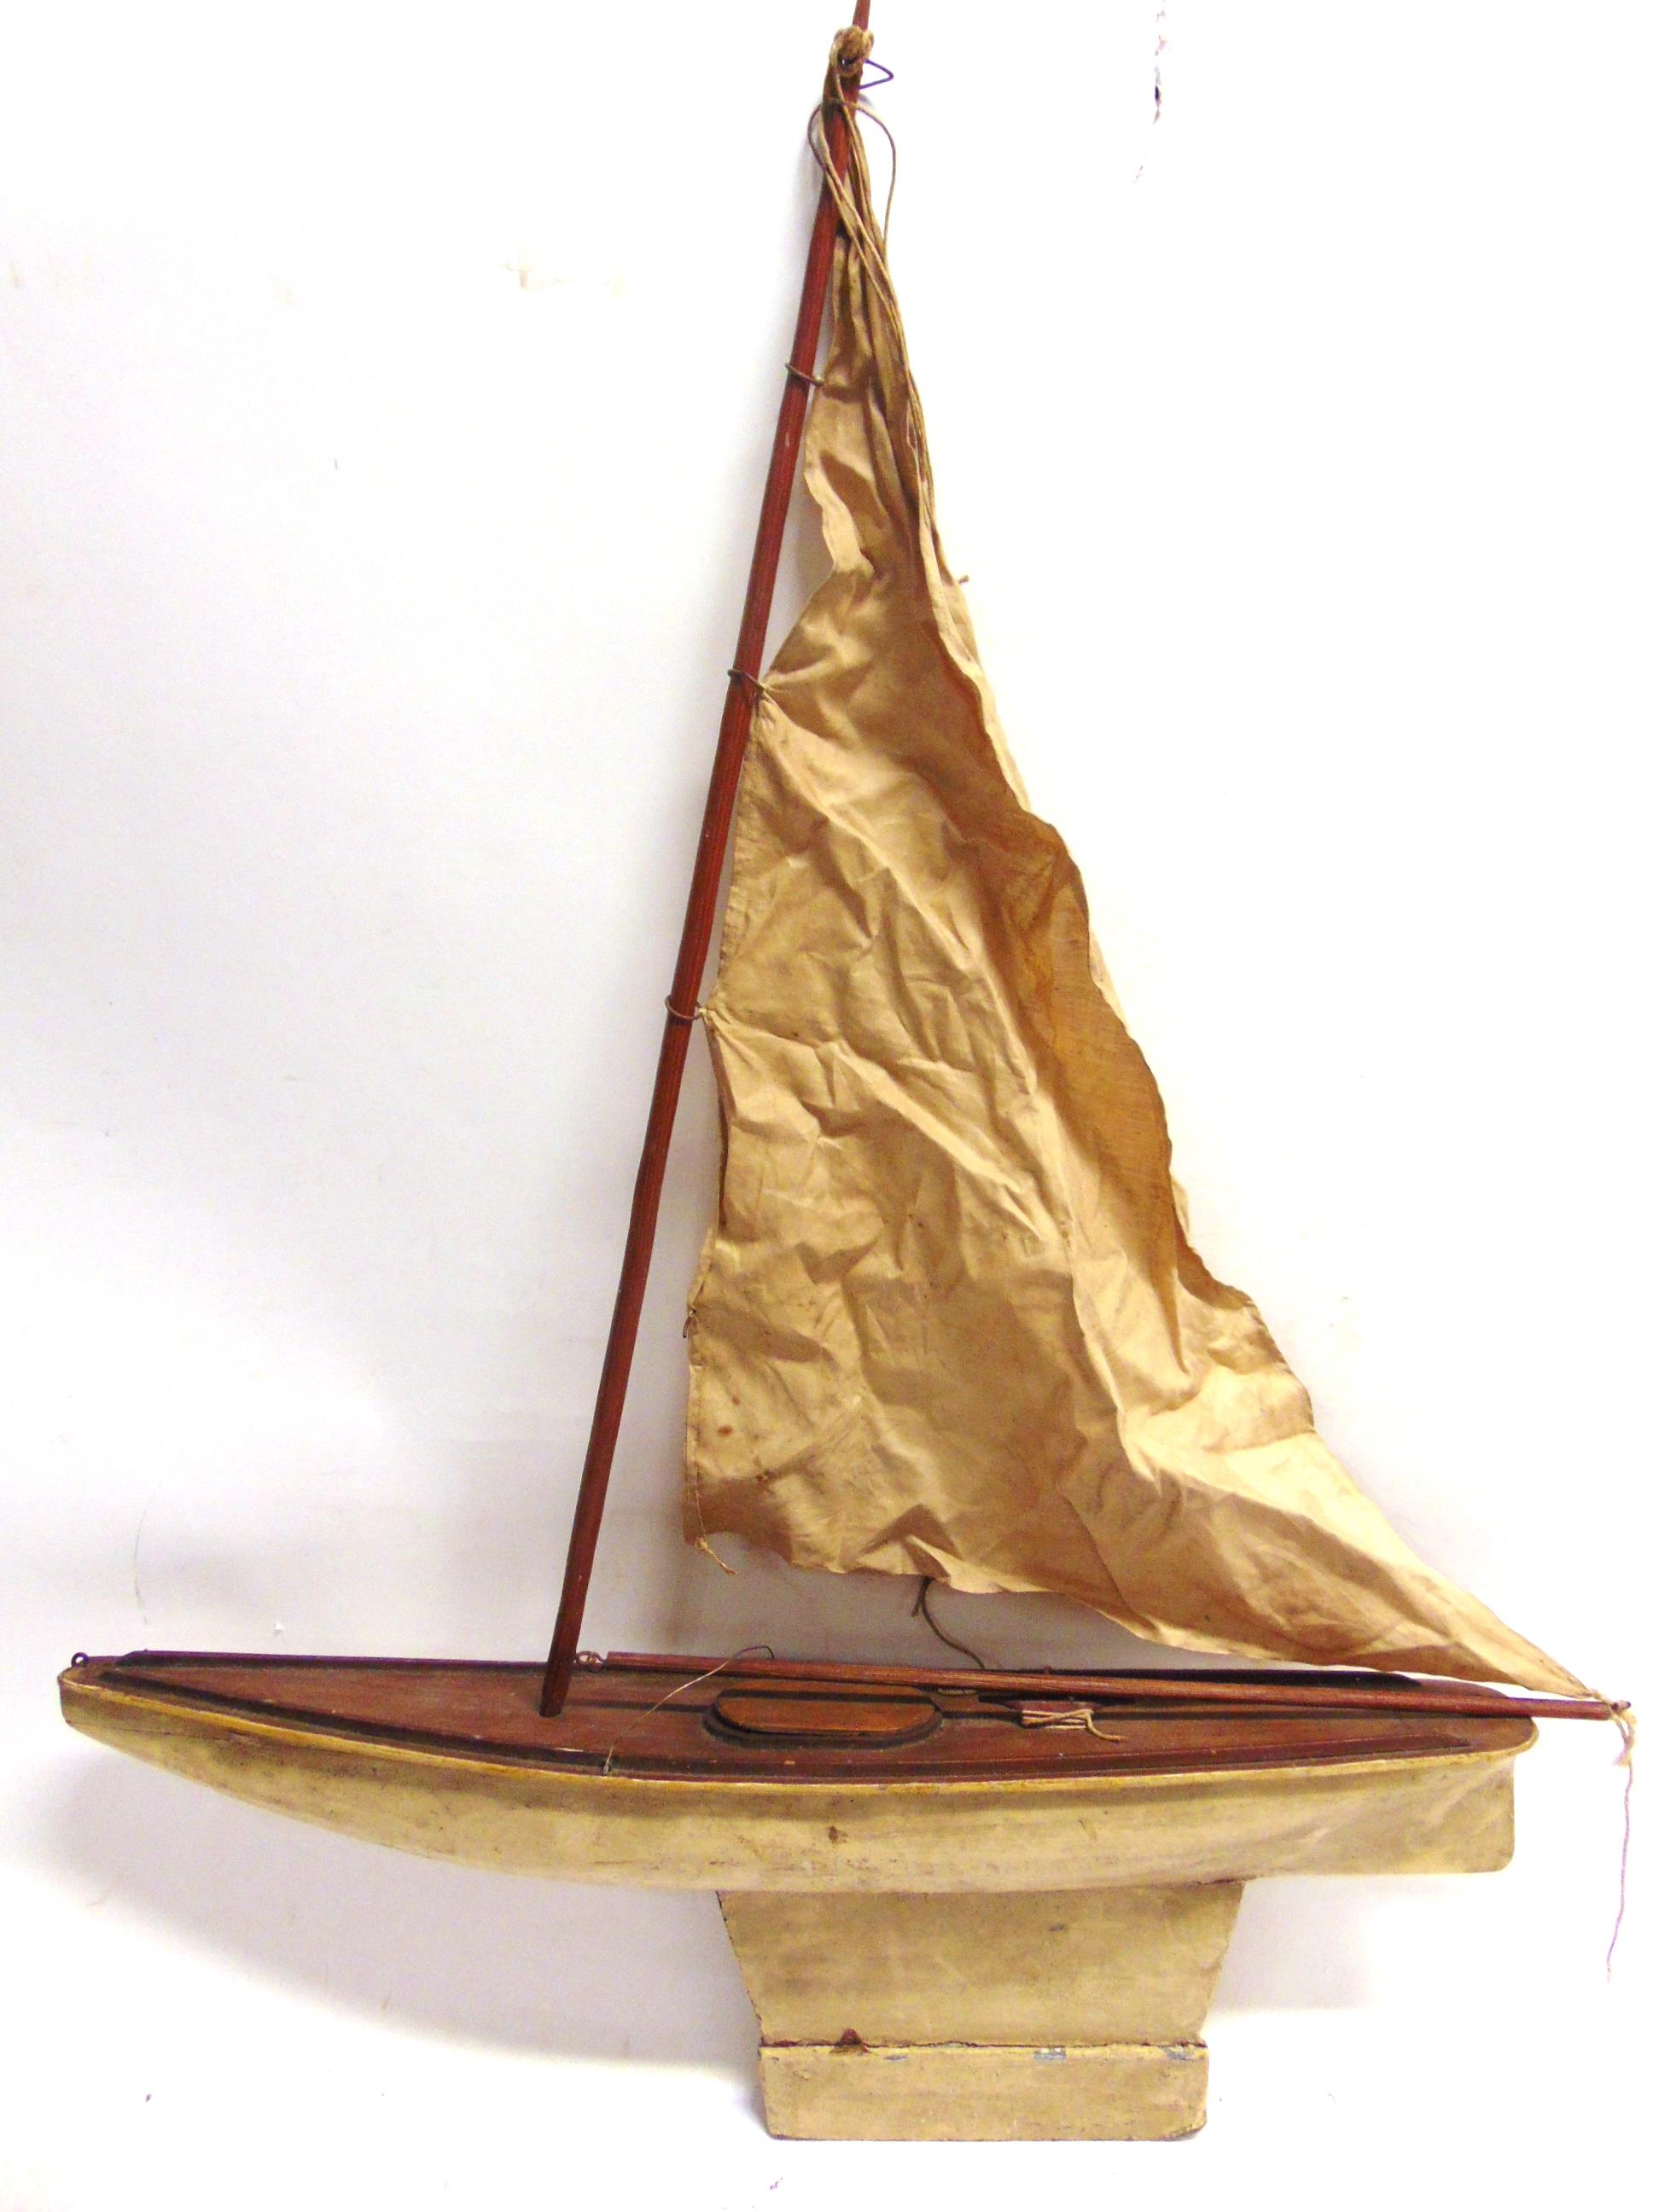 A POND YACHT of wood construction, with a plank-effect deck, cream painted hull, and a weighted